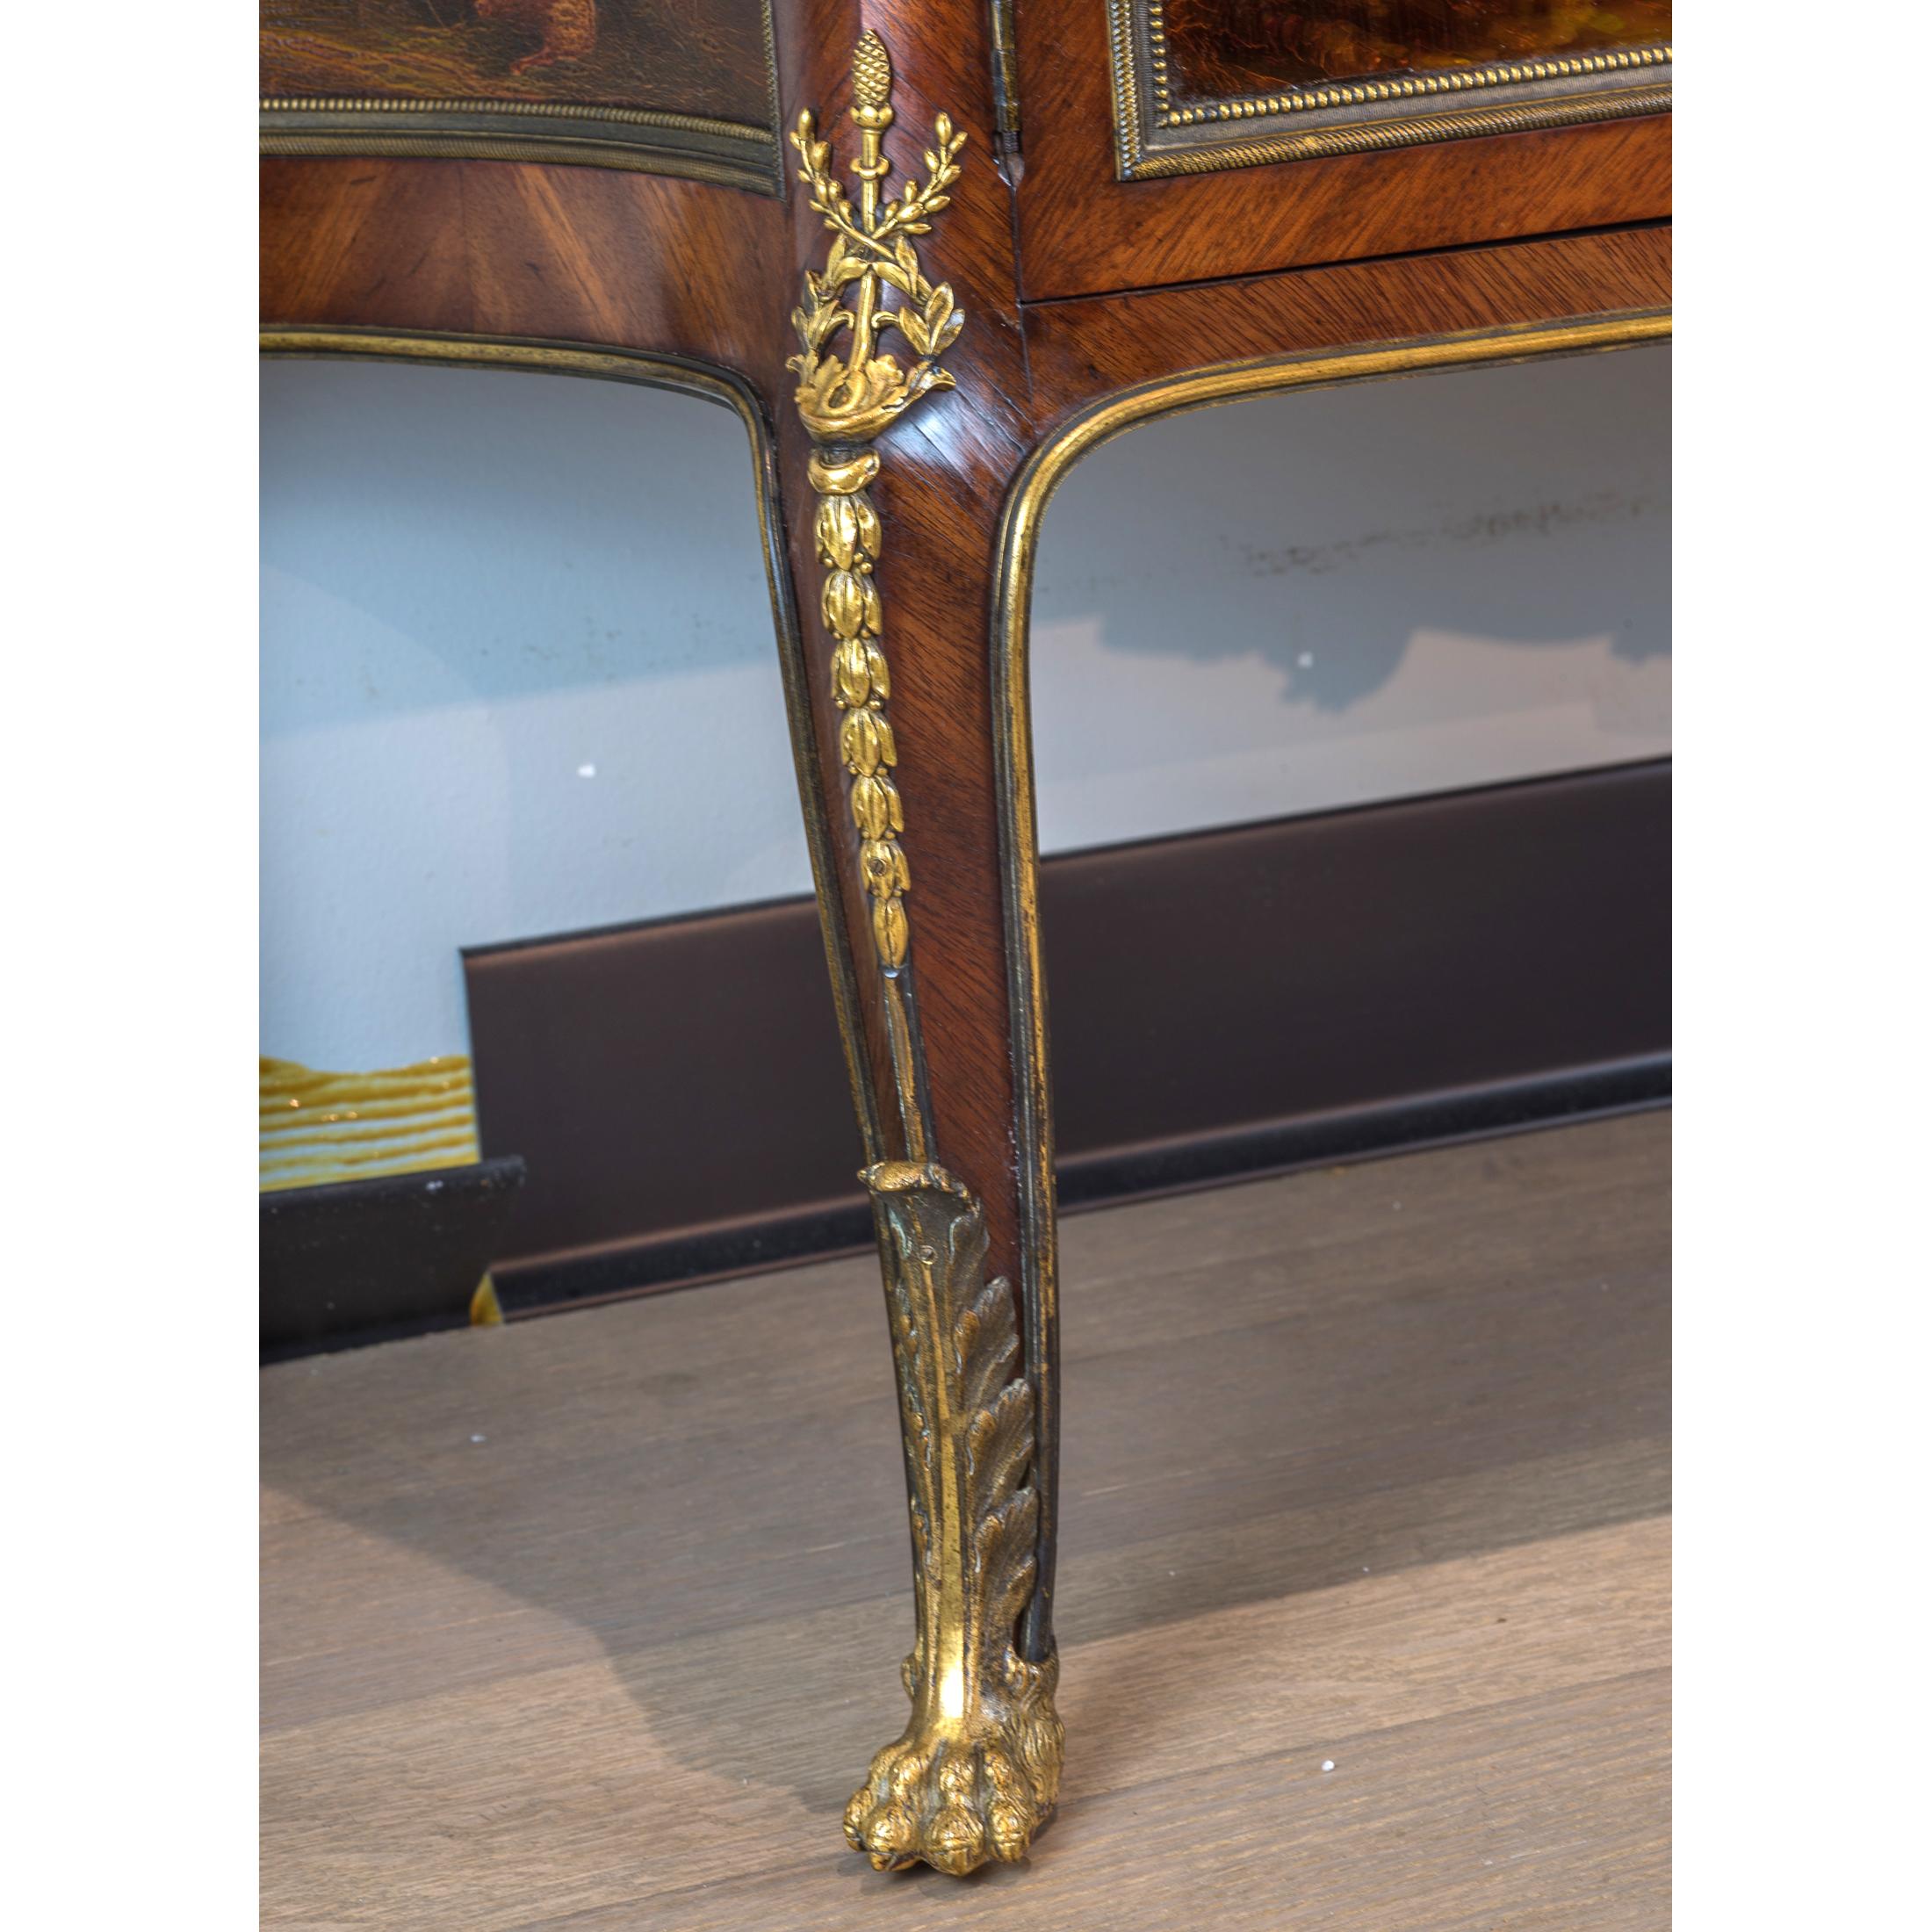 Fine Quality French Gilt-Bronze Mounted Vitrine For Sale 6